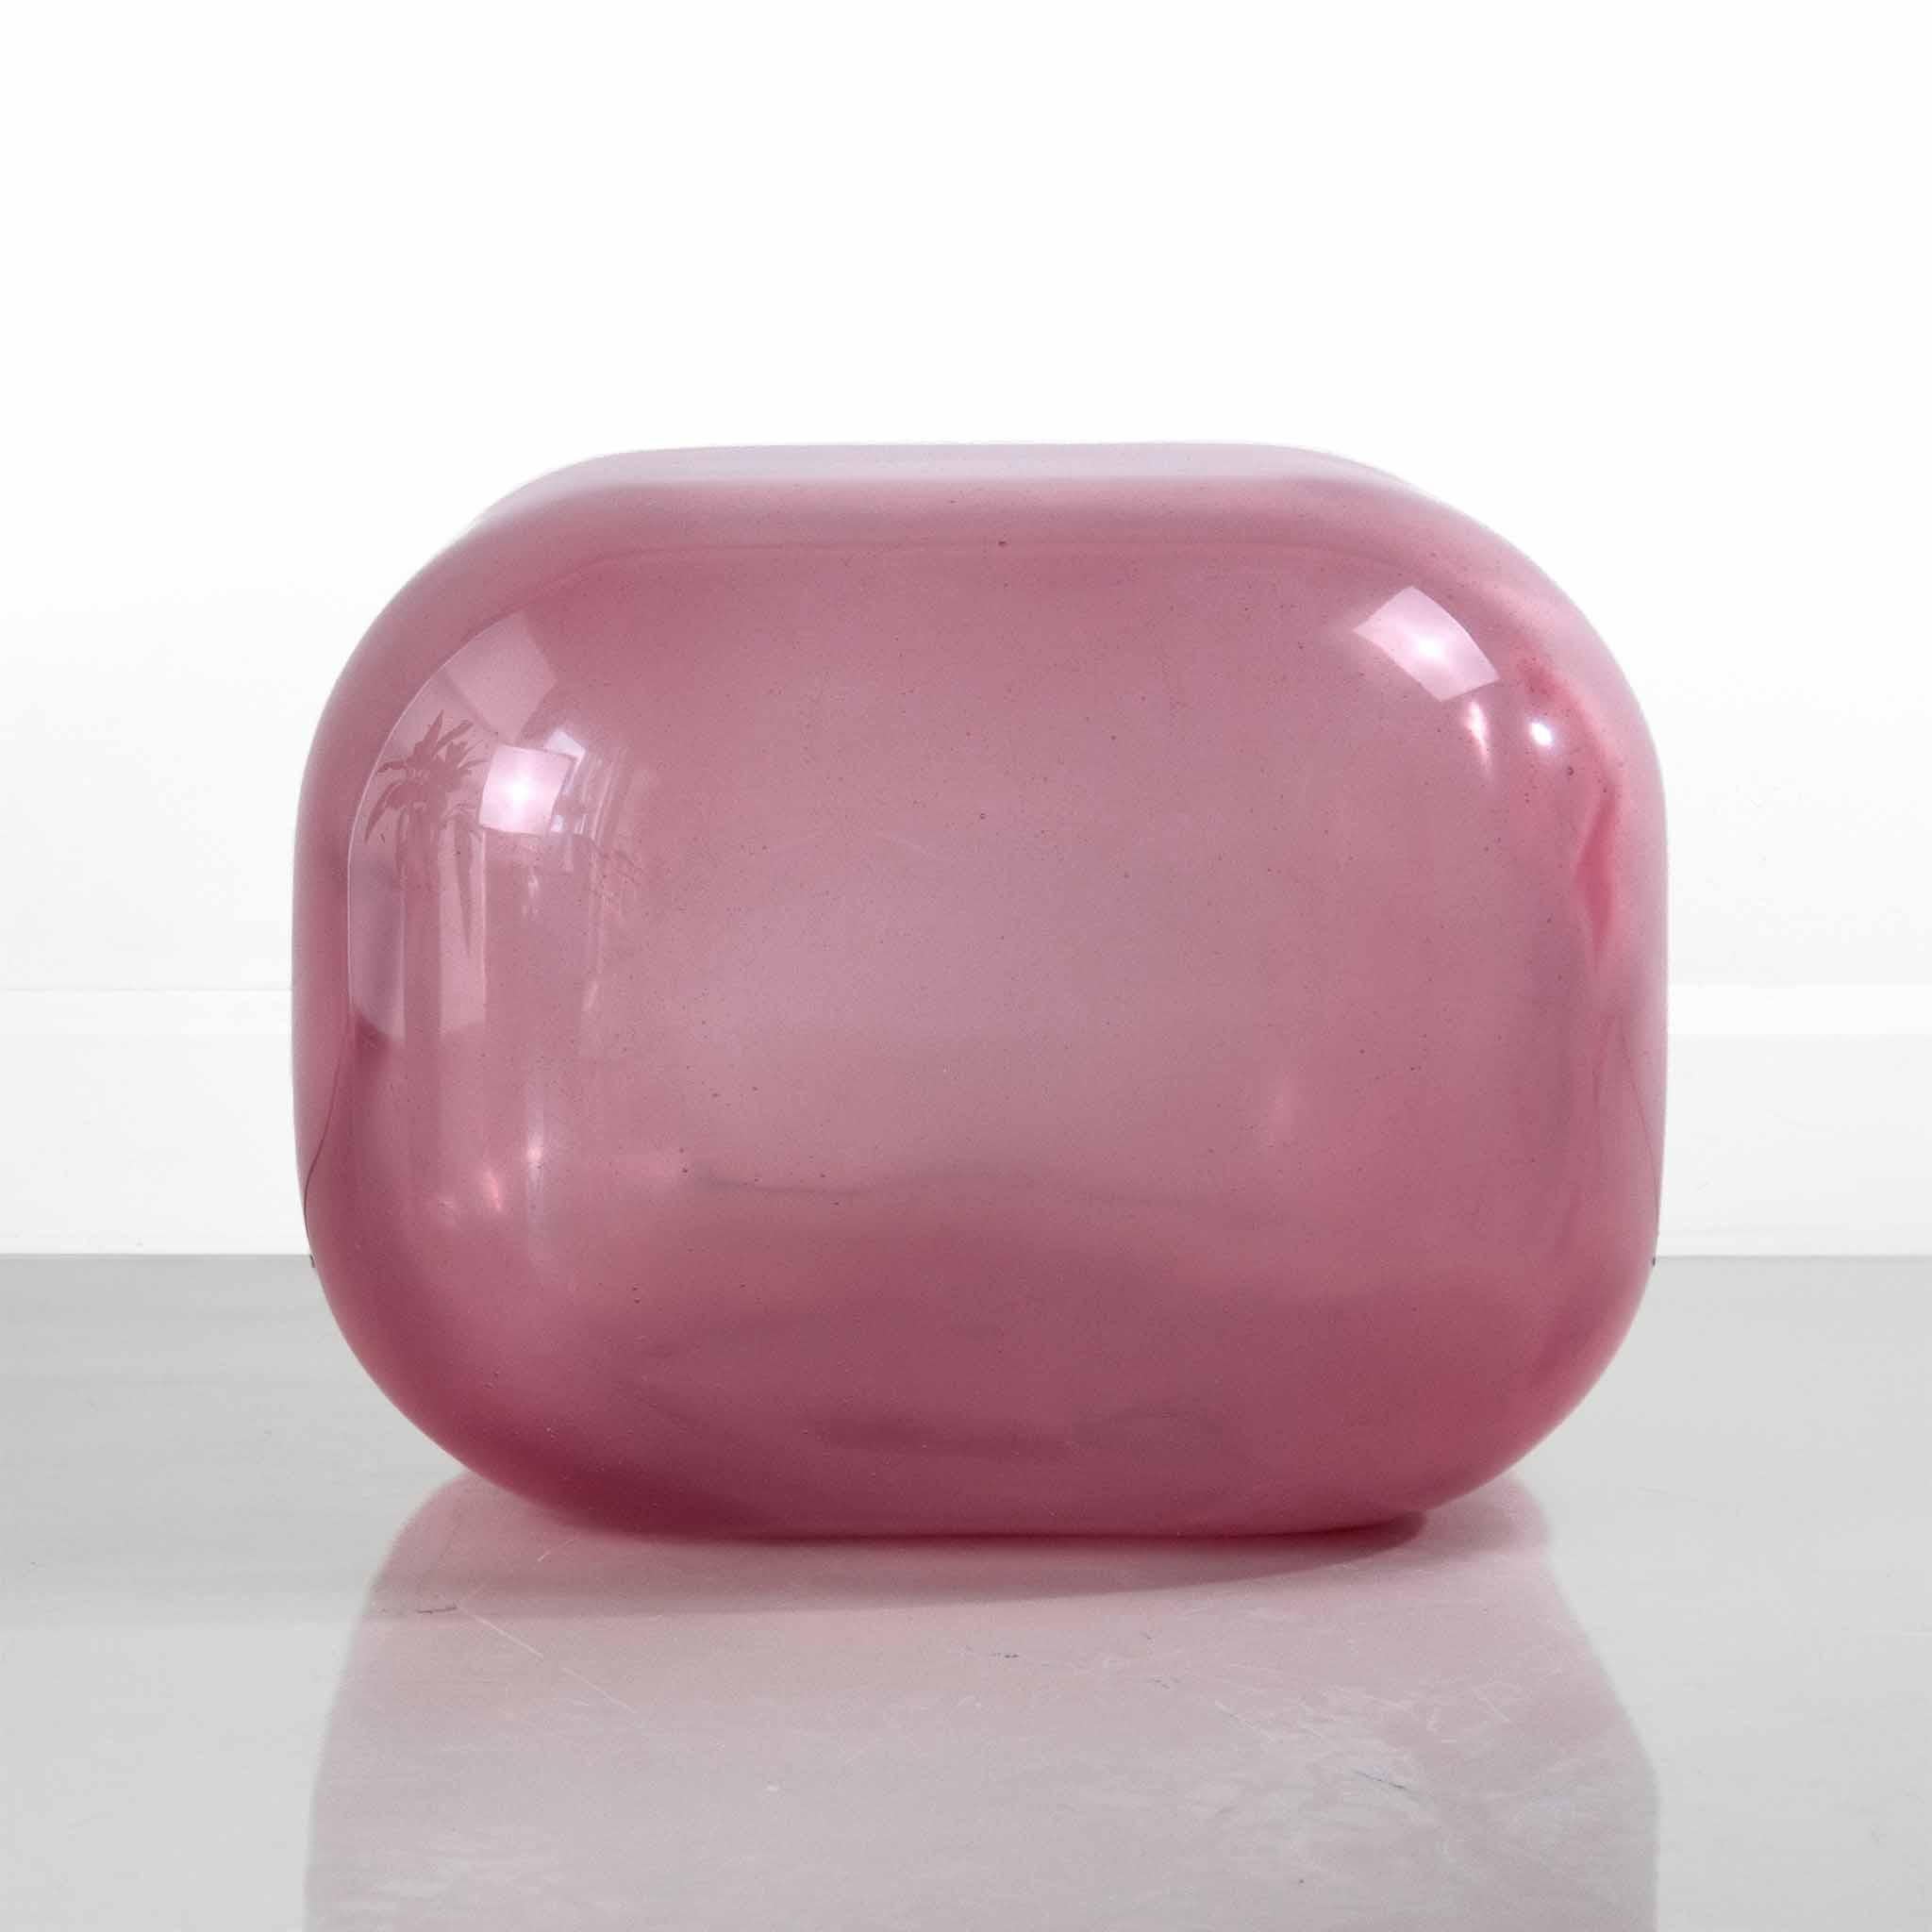 Cerise Oort Resin side table by creators of objects.
Materials: Resin, pigment
DImensions: W 51 x D 51 x H 40 cm
Also Available: Tourmaline, Bordeaux, Spice, Ochre, Forest, Ocean, Twilight, Rock, Lilac, Cerise, Coral Spice, Honey, Moss, Surf,